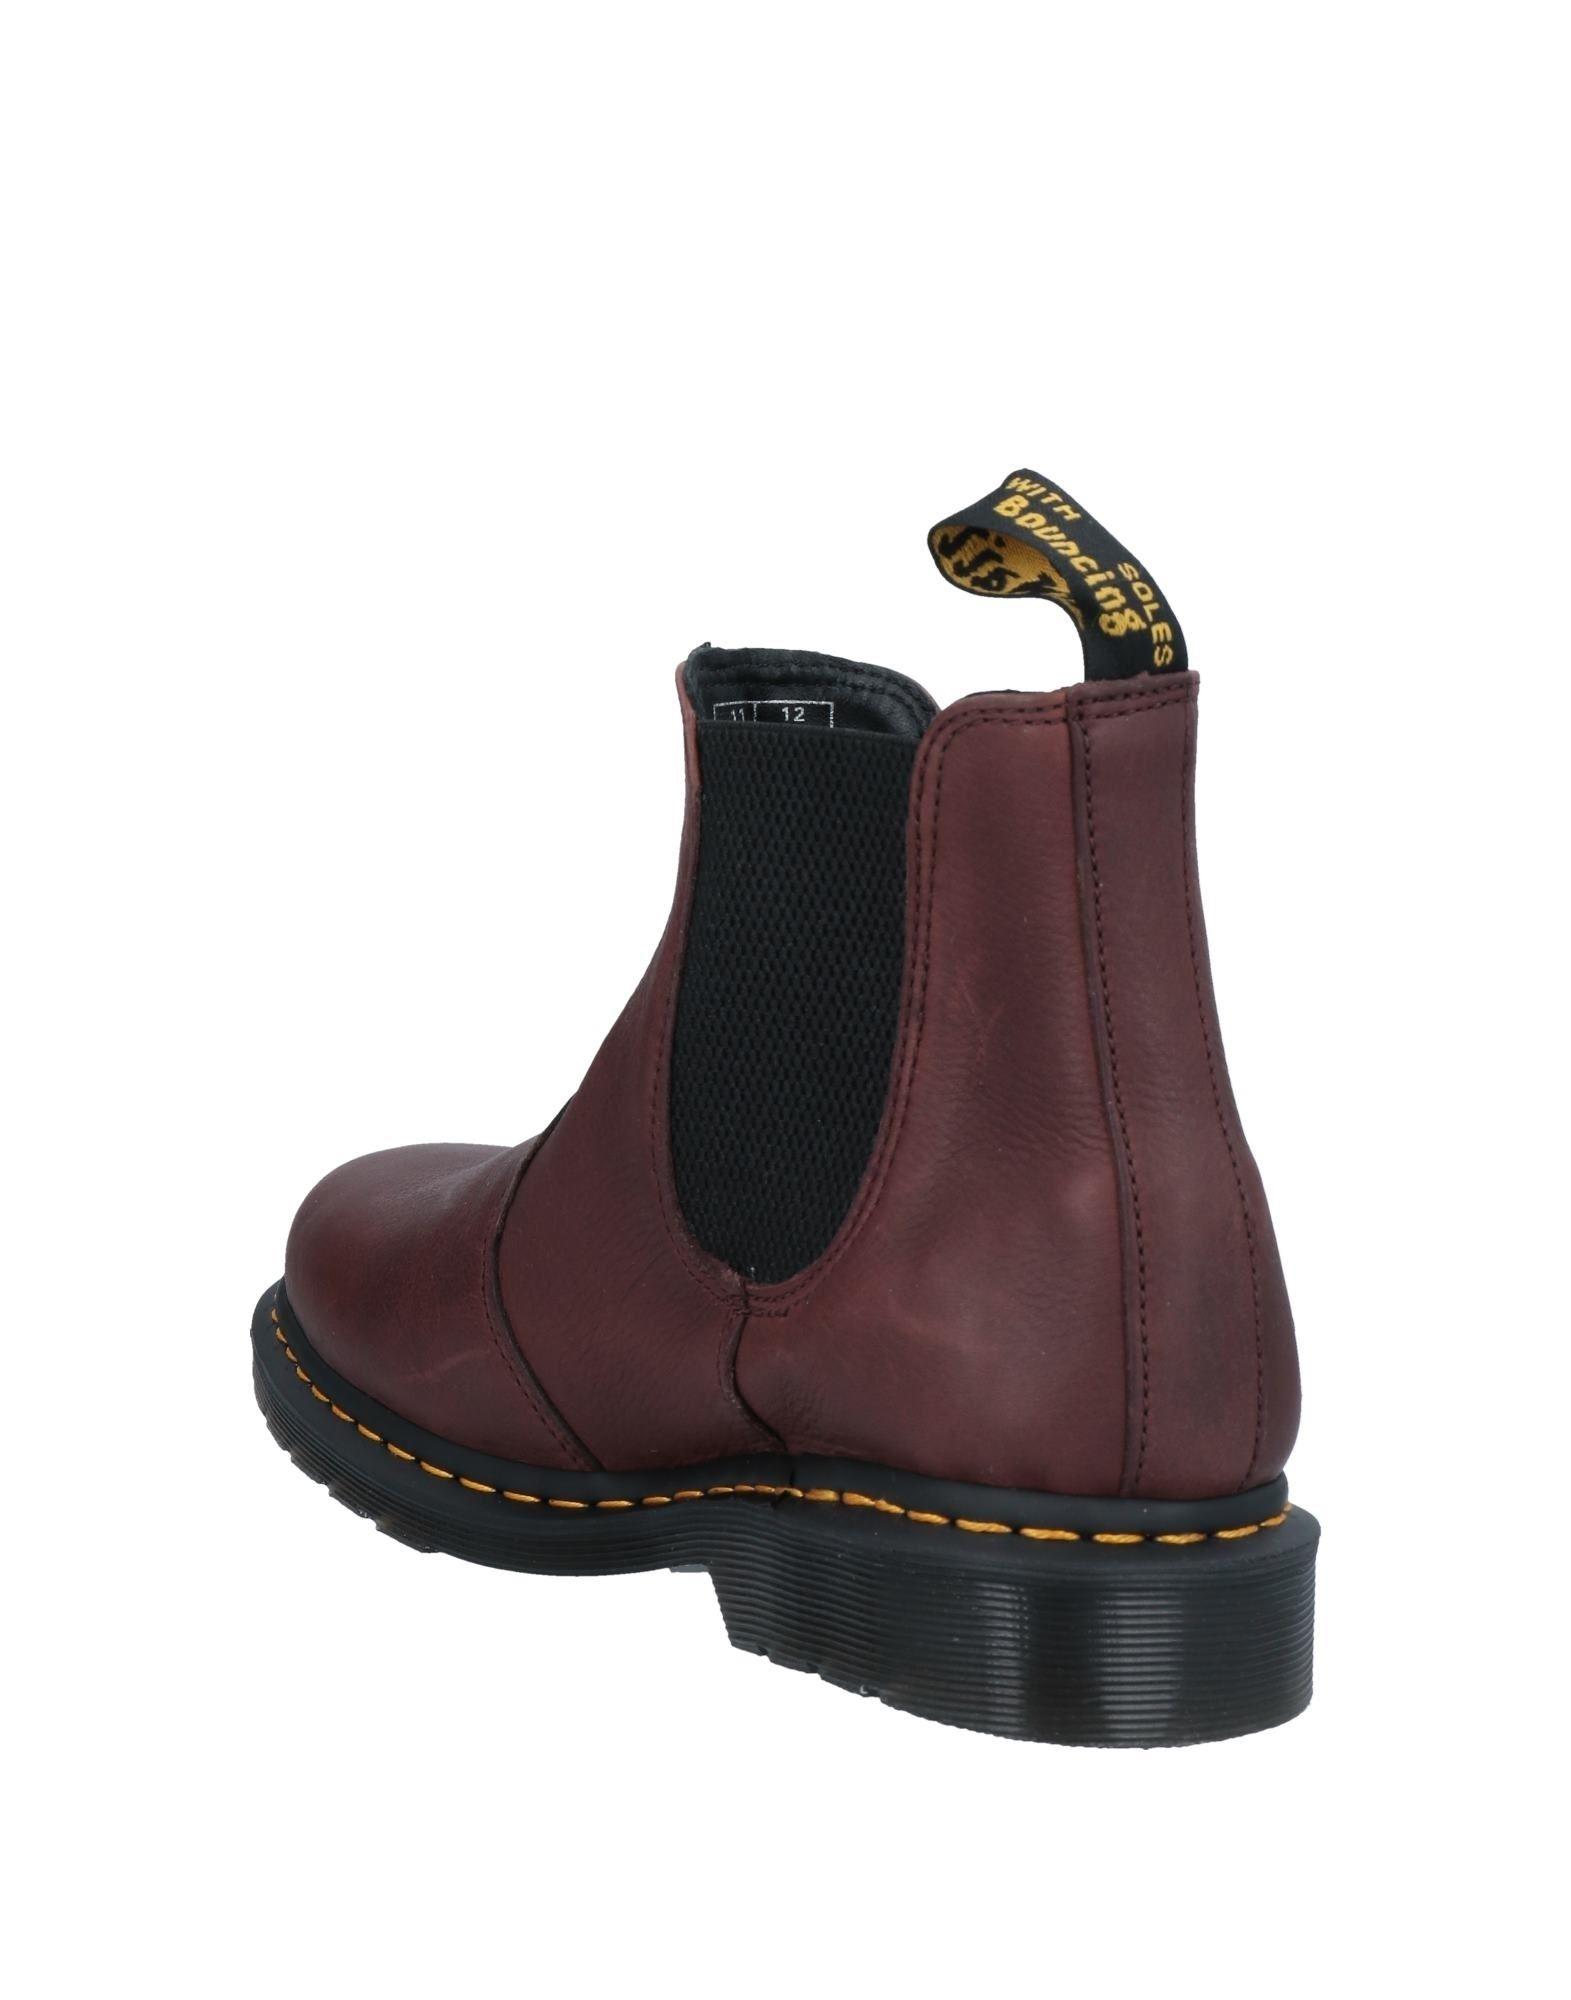 Dr. Martens Leather Ankle Boots in Cocoa (Brown) for Men - Lyst